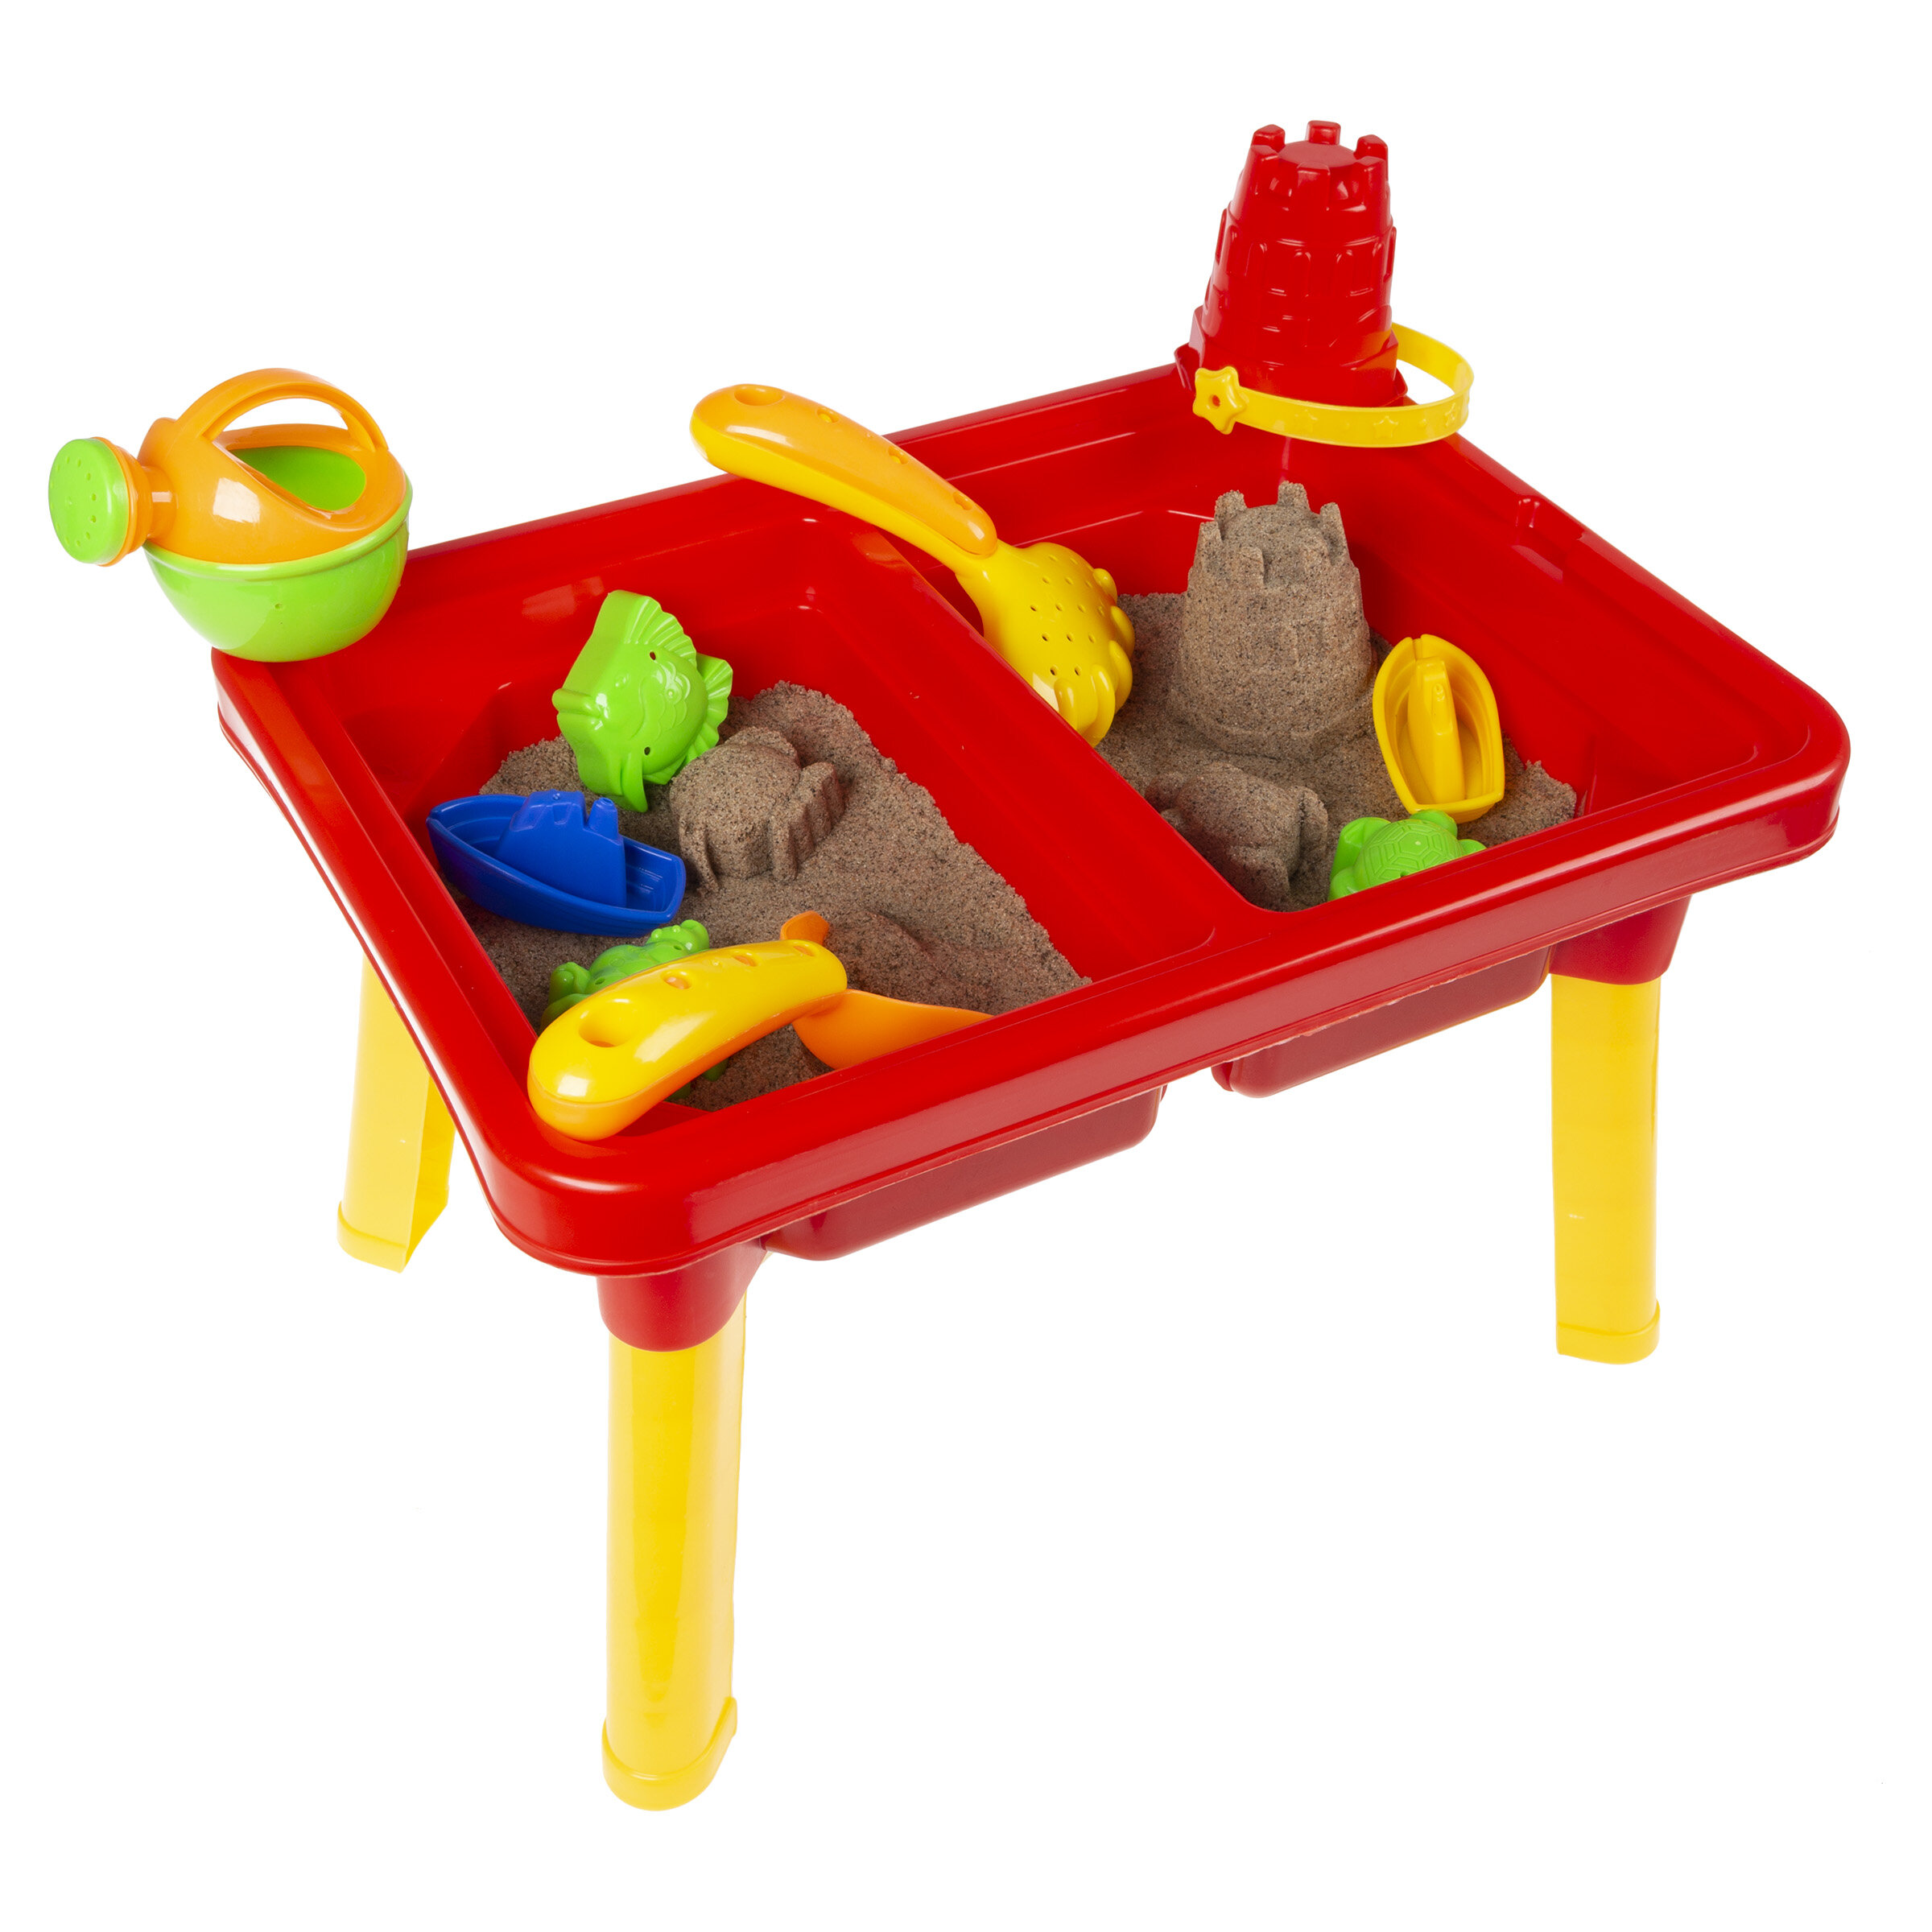 Milageto Outdoor 4 in 1 Summer Fun Sand Water Table Sandpit Sandpit Table 